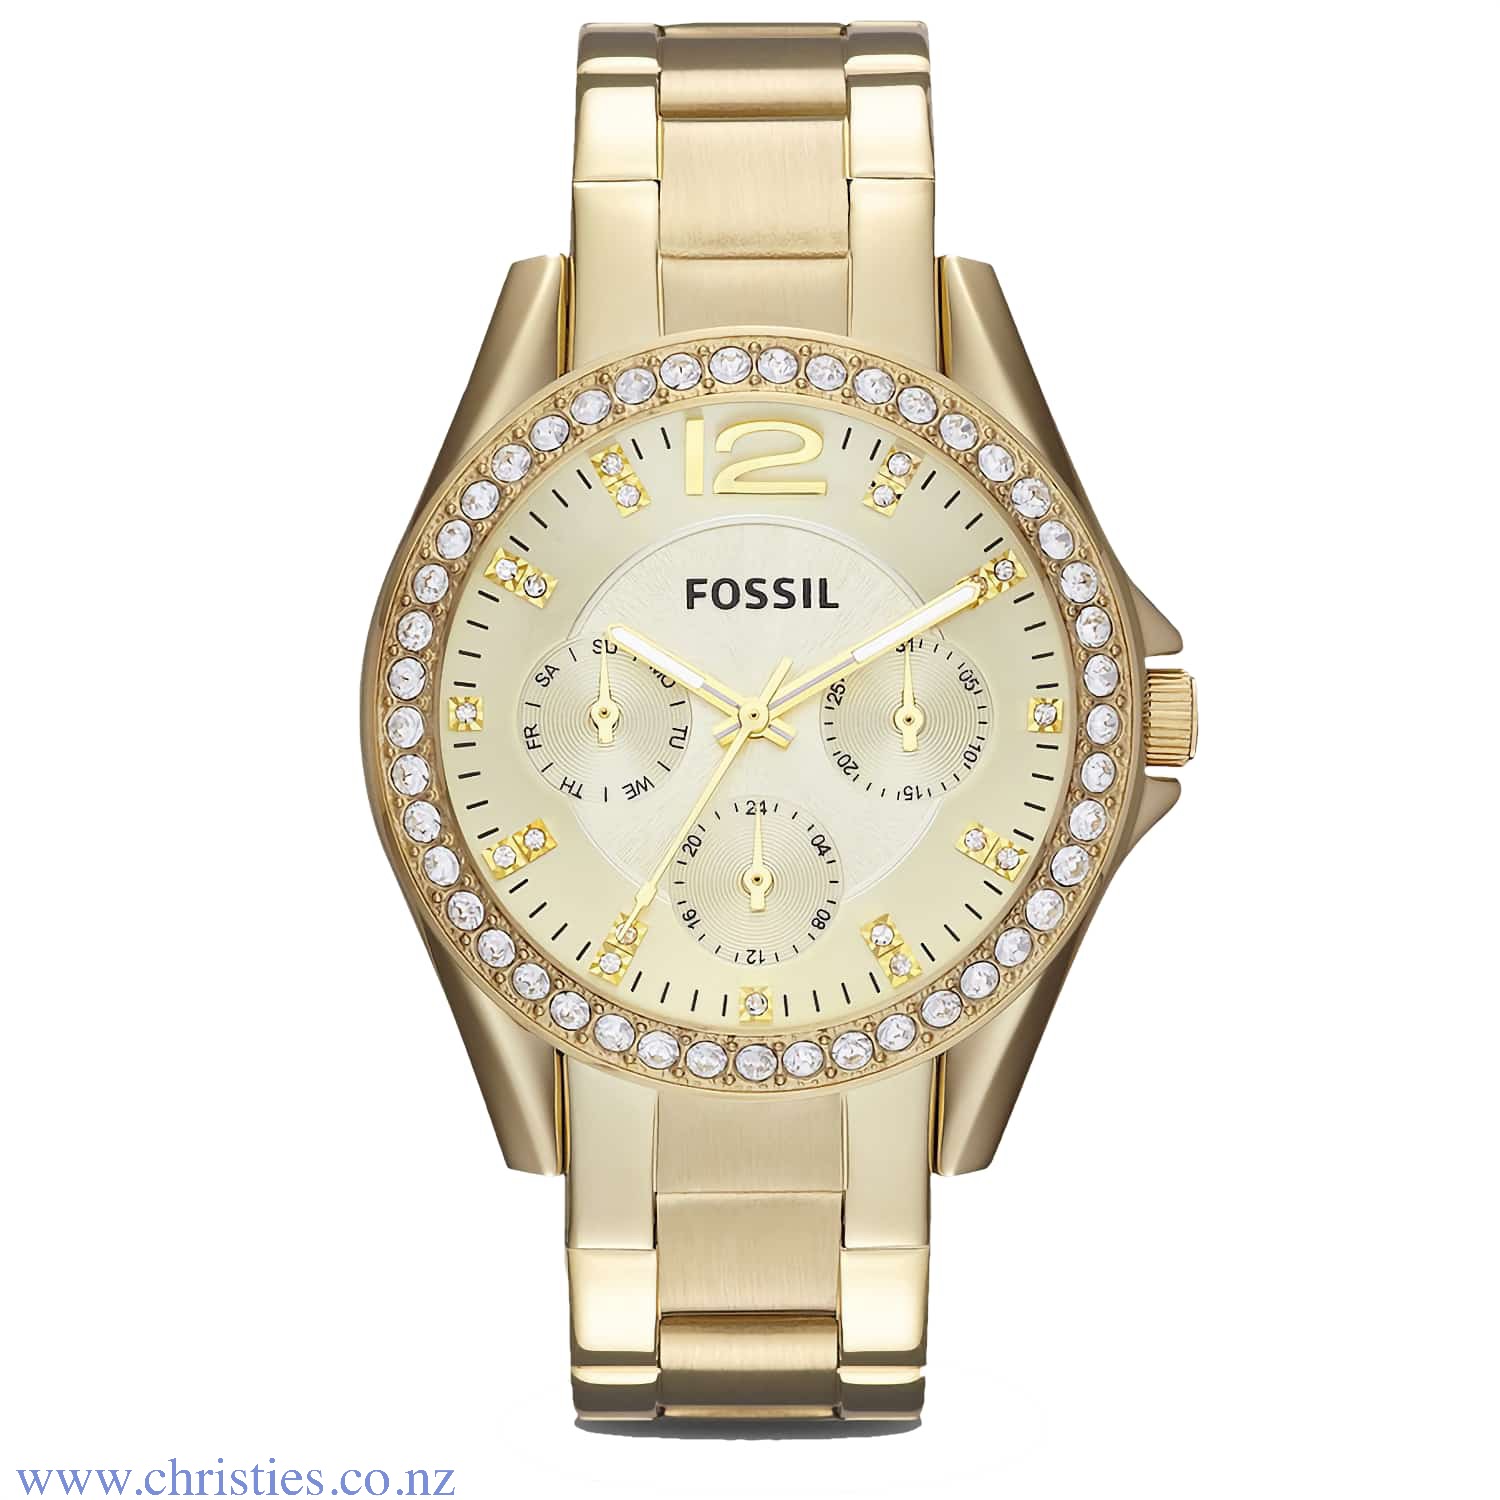 ES3203 Fossil Riley Multifunction Yellow Gold Tone Watch. ES3203 Fossil Riley Multifunction Yellow Gold Tone Watch with 100 Metre Water Resist Rating Humm -Buy Little things up to $1000 and choose 10 weekly or 5 fortnightly payments with no interest. Late